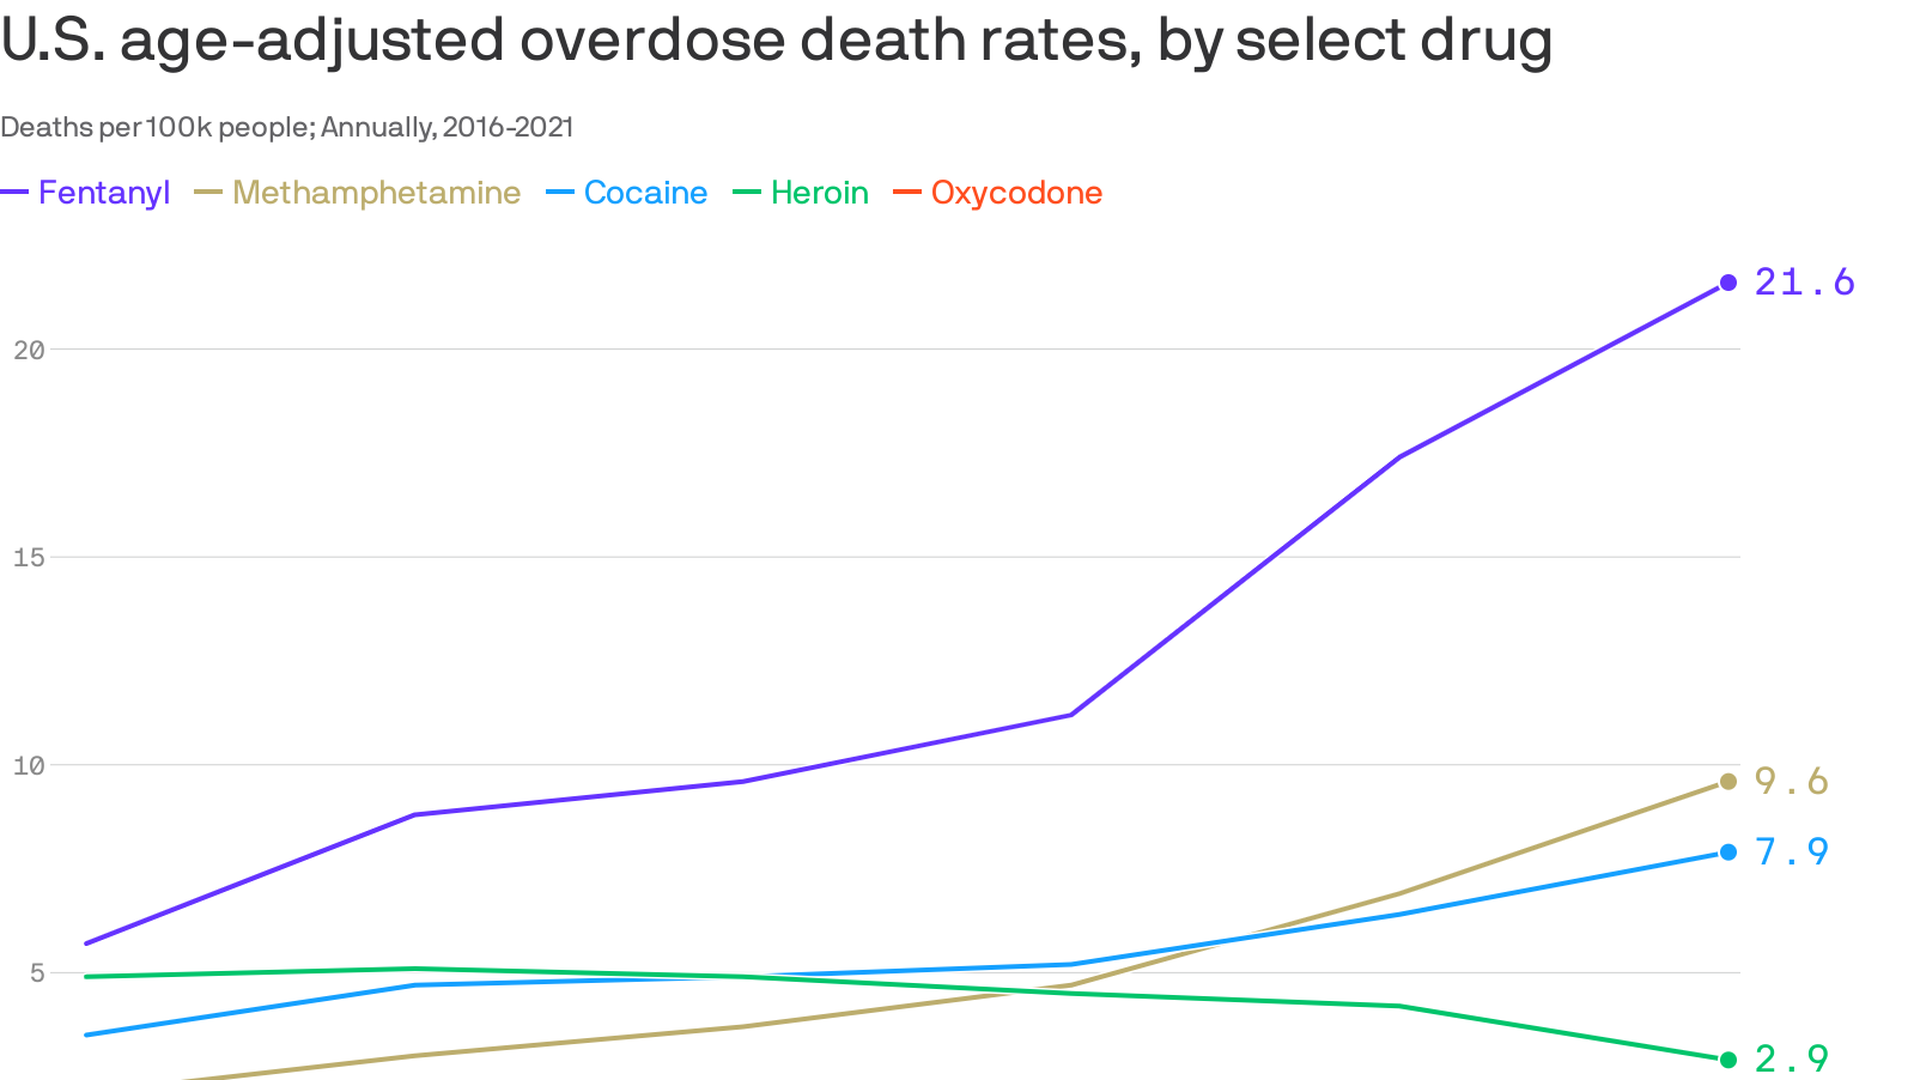 The fight against fentanyl overdoses and deaths